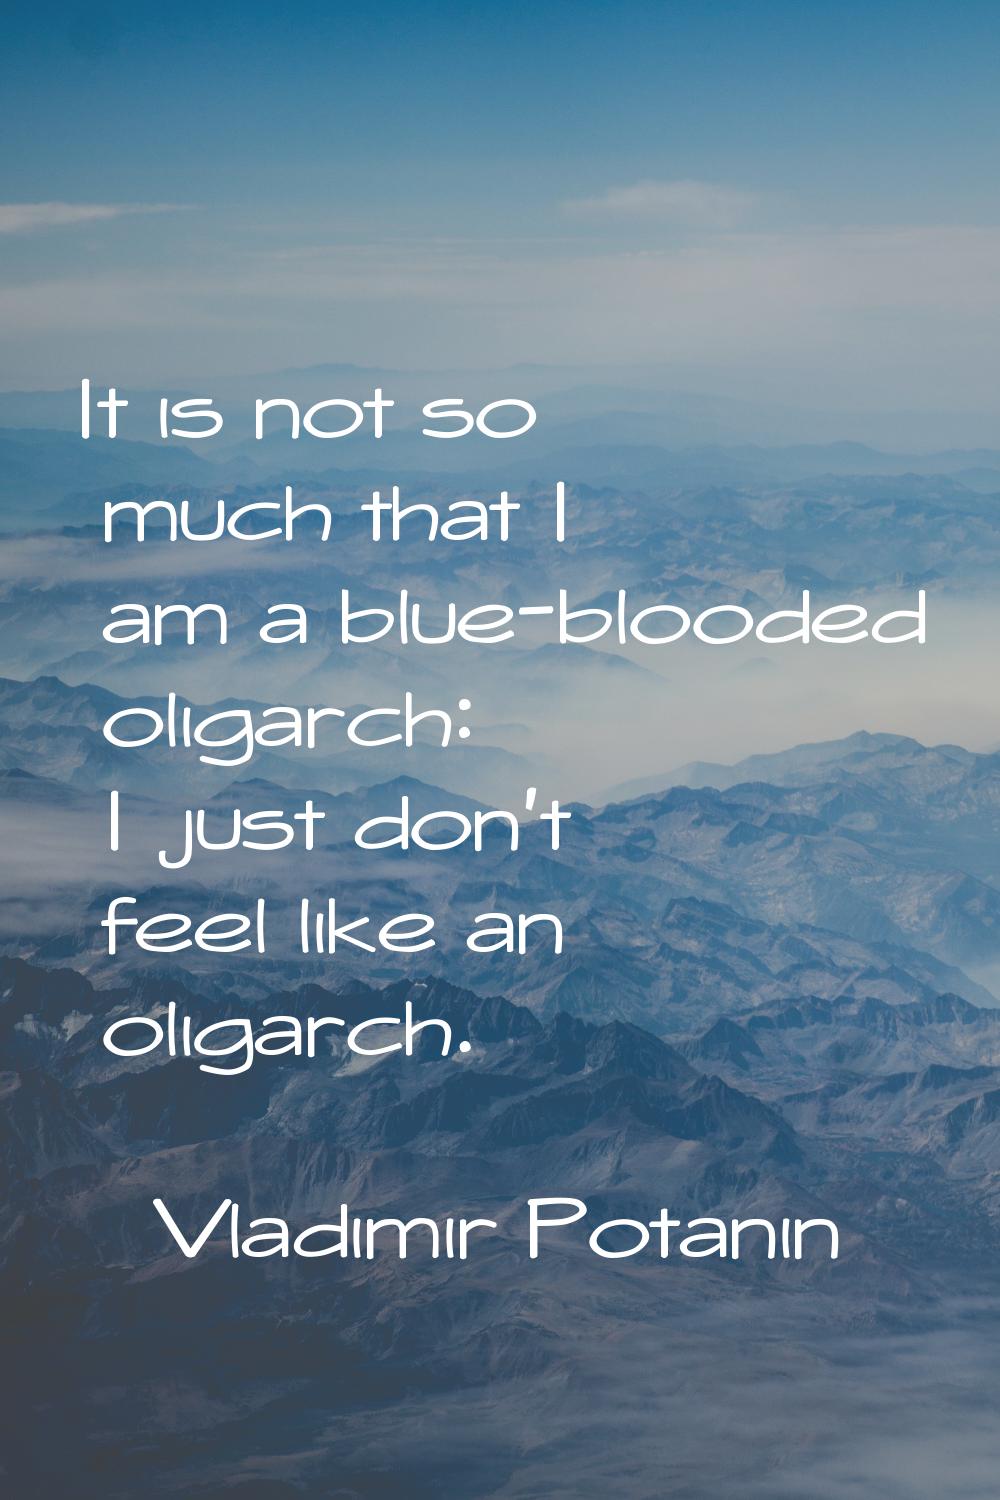 It is not so much that I am a blue-blooded oligarch: I just don't feel like an oligarch.